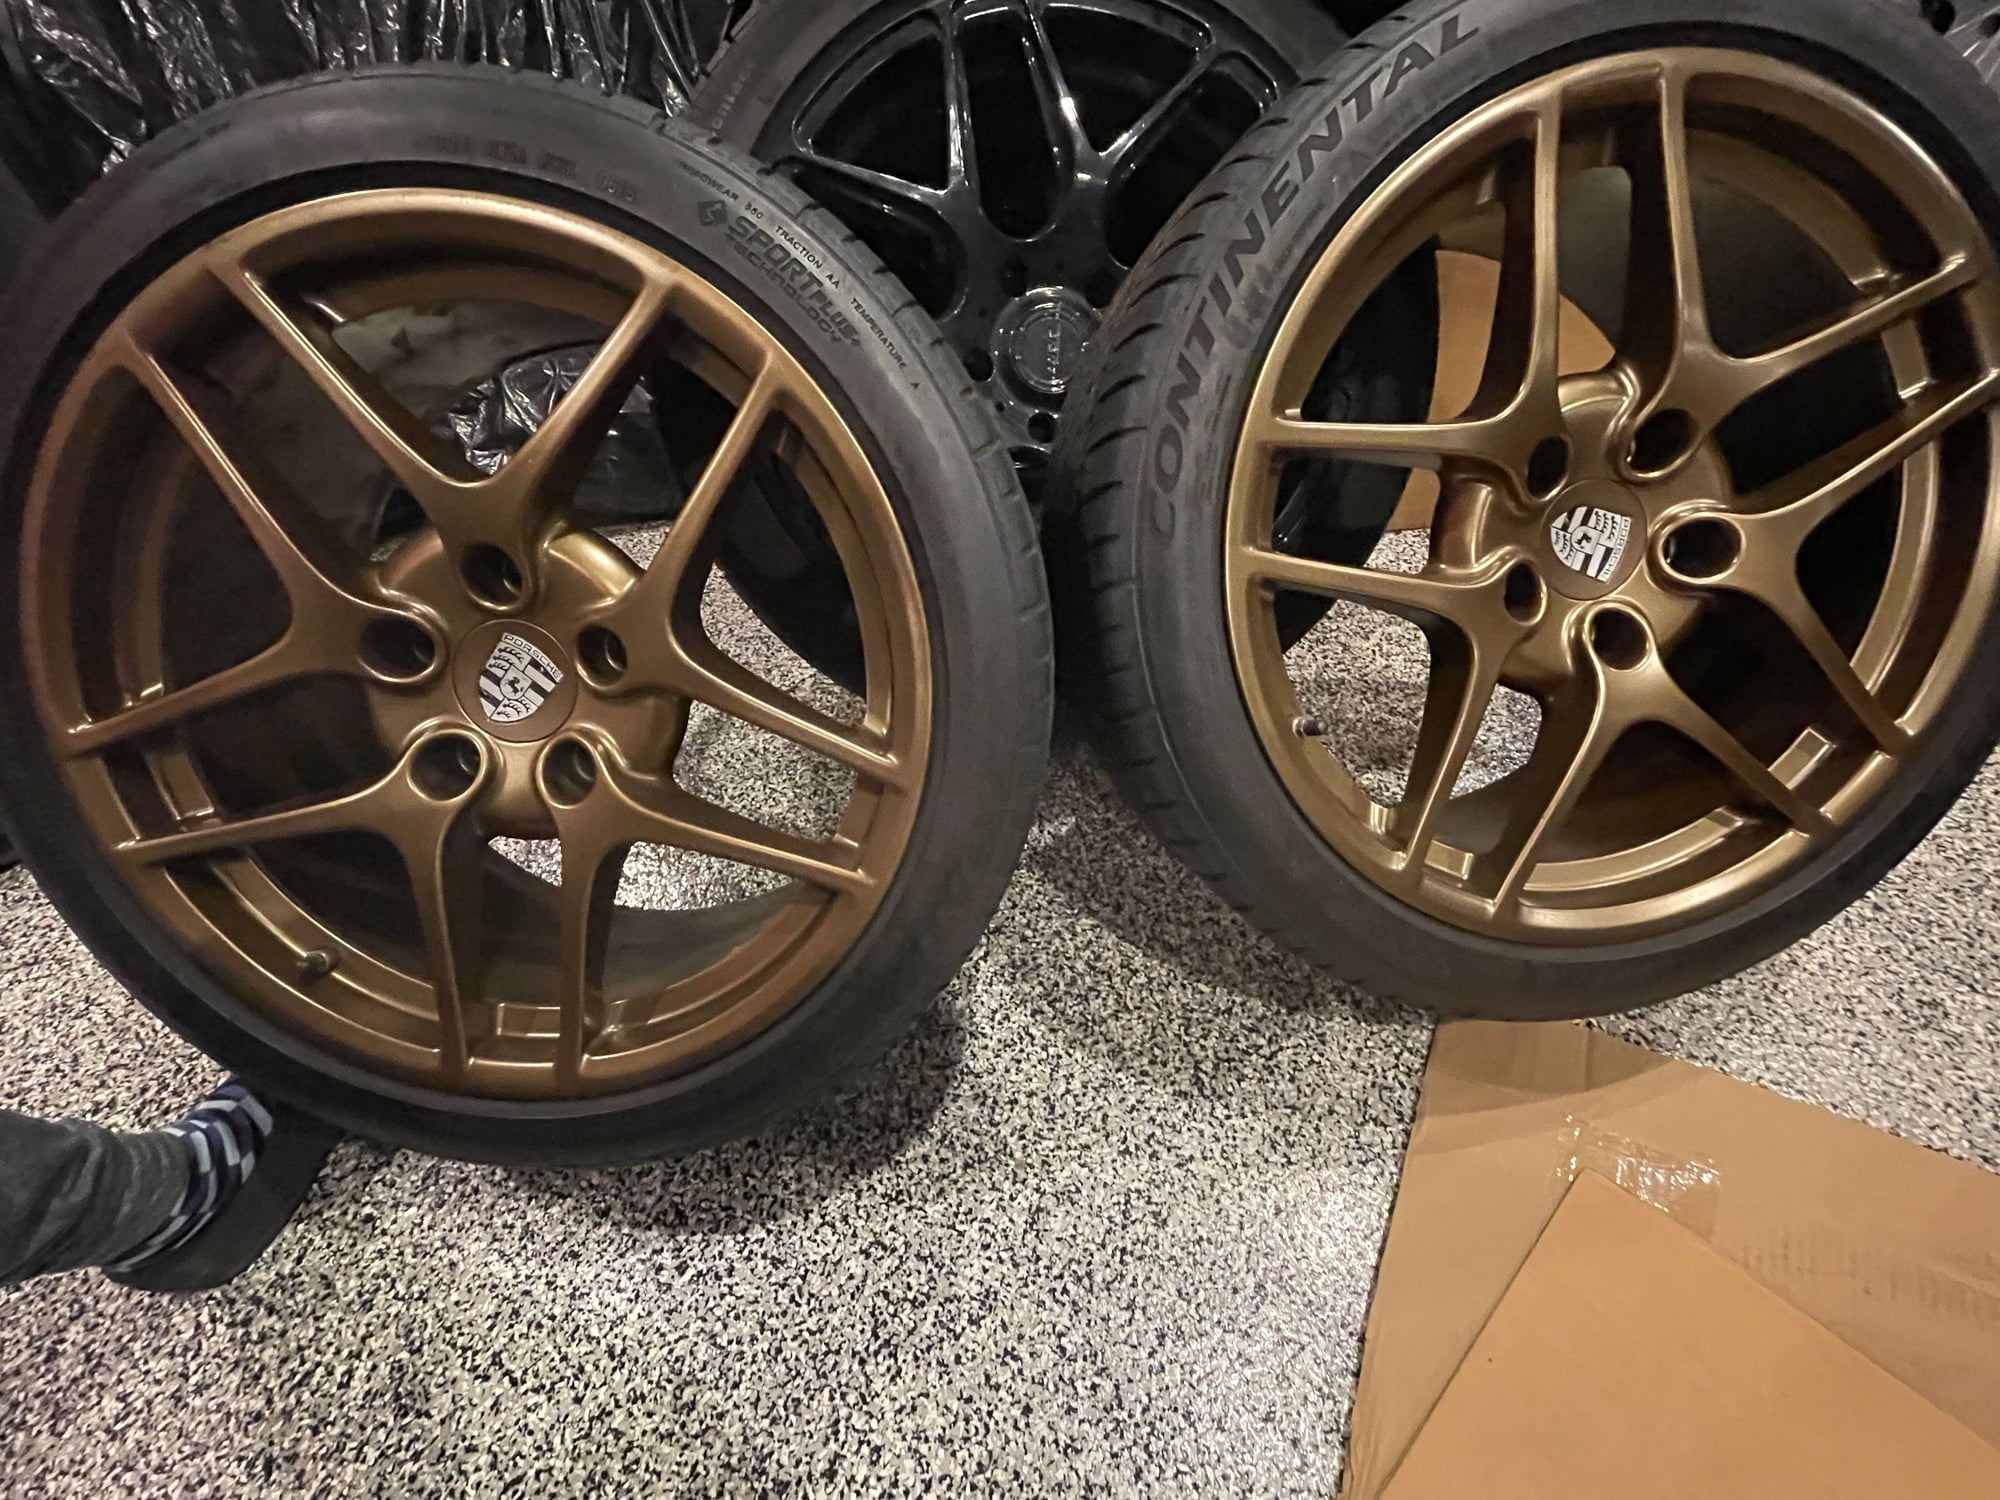 Wheels and Tires/Axles - Porsche OEM 987 / 997 / other wheels and Continental Extreme Contact DWS Tires - Used - 2009 to 2012 Porsche All Models - Cincinnati, OH 45242, United States